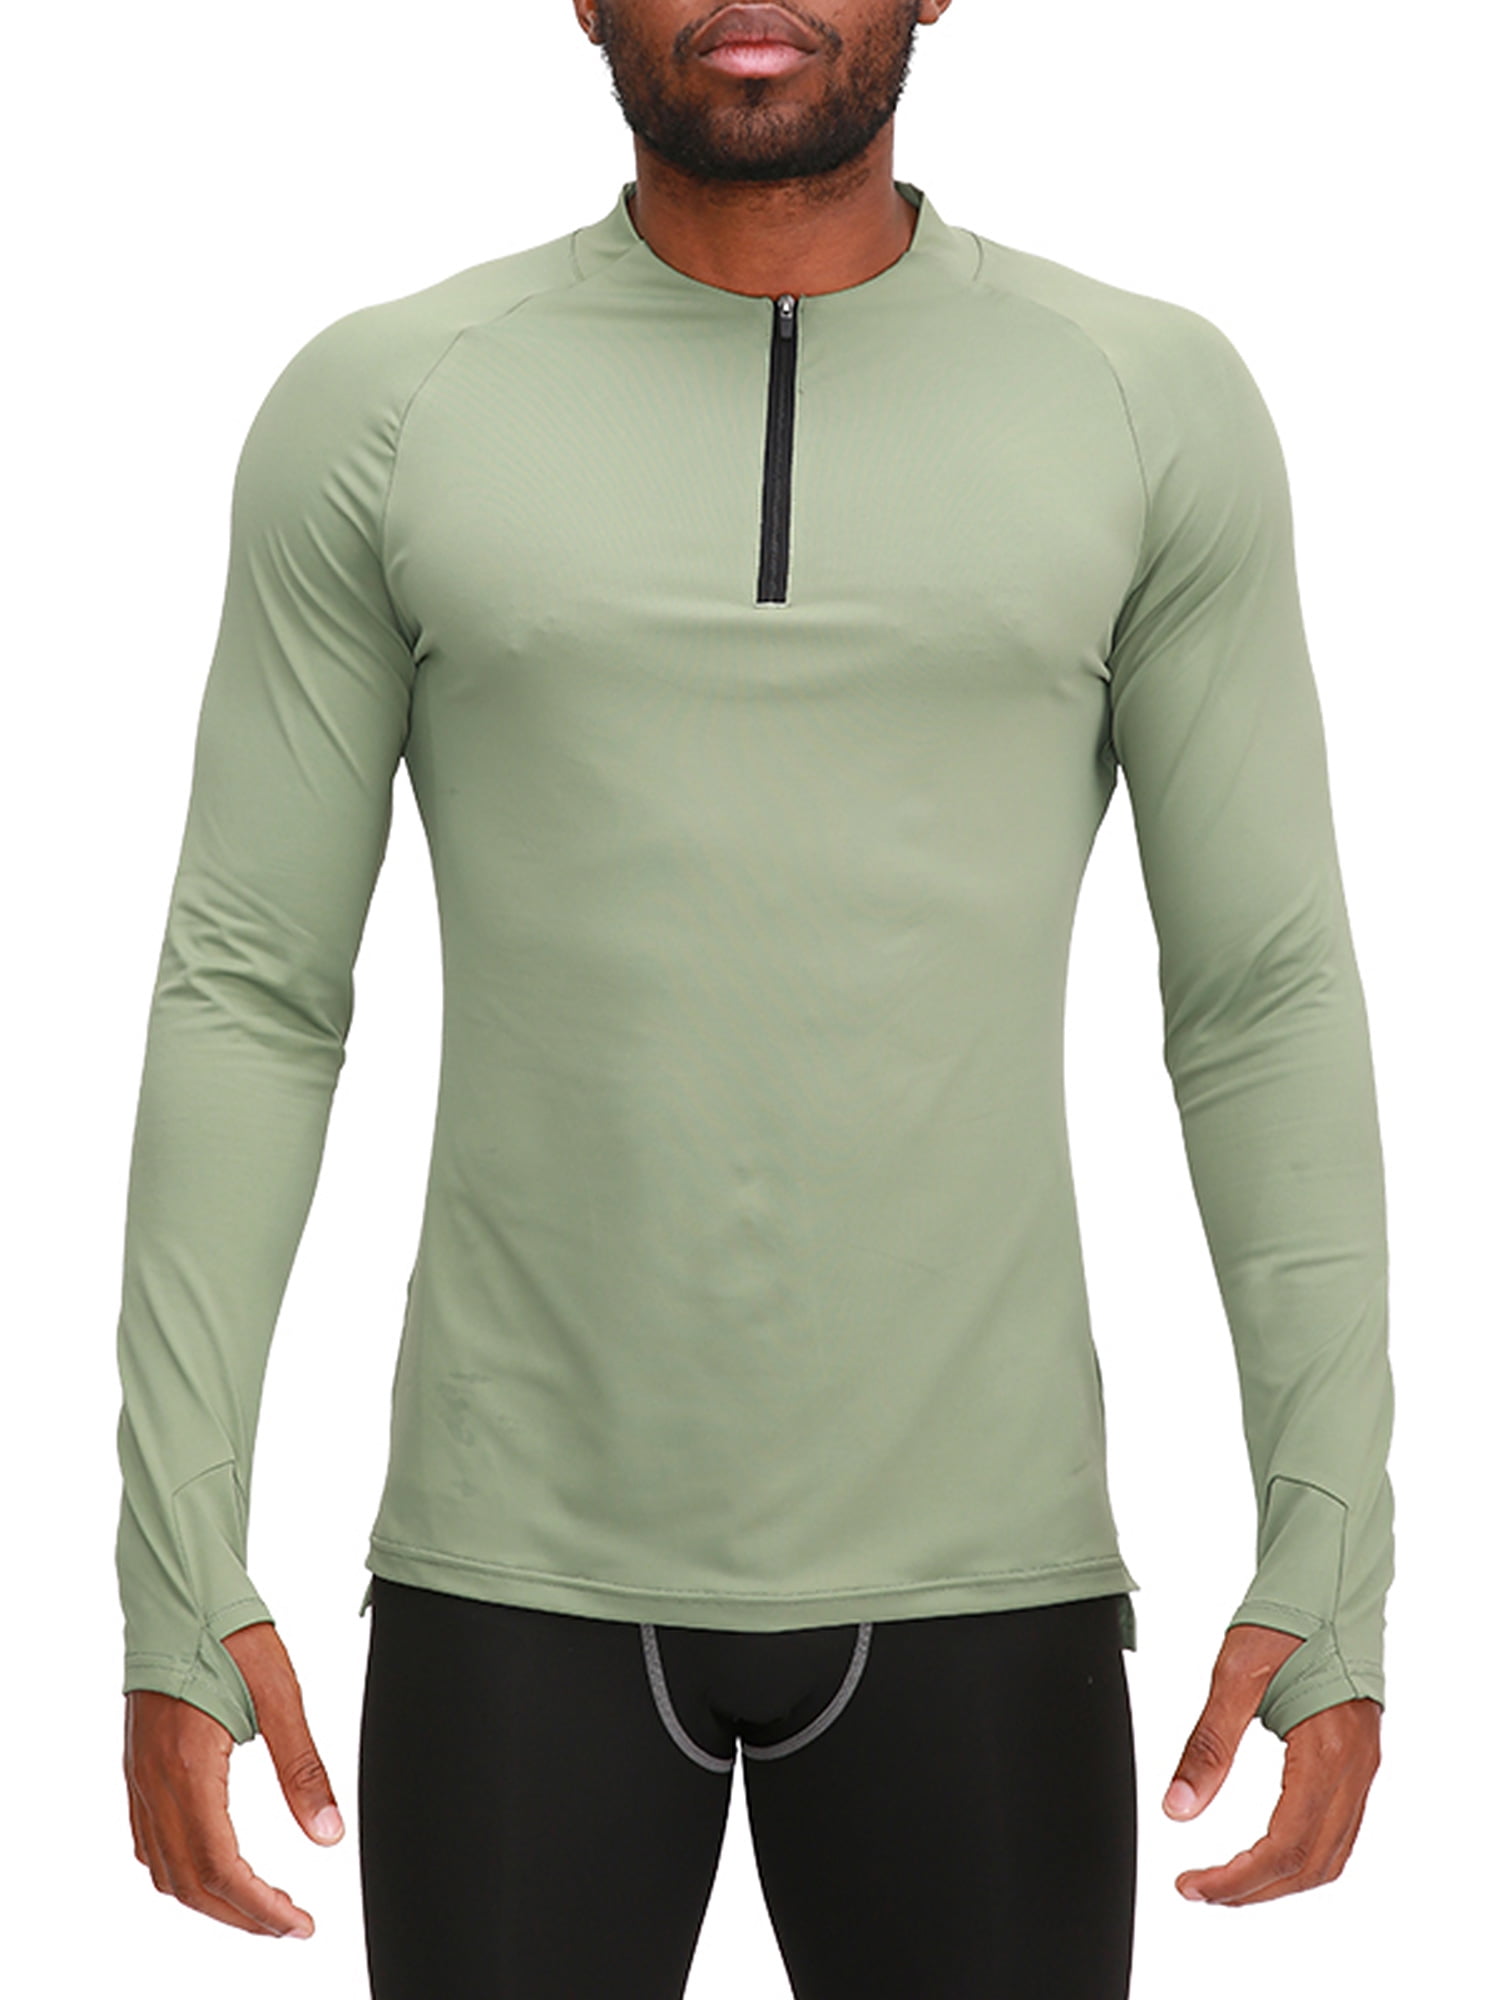 Men's Compression Thermal Shirt 1/4 Zip Up Mock Neck Gym Base Layer Top Dry fit 